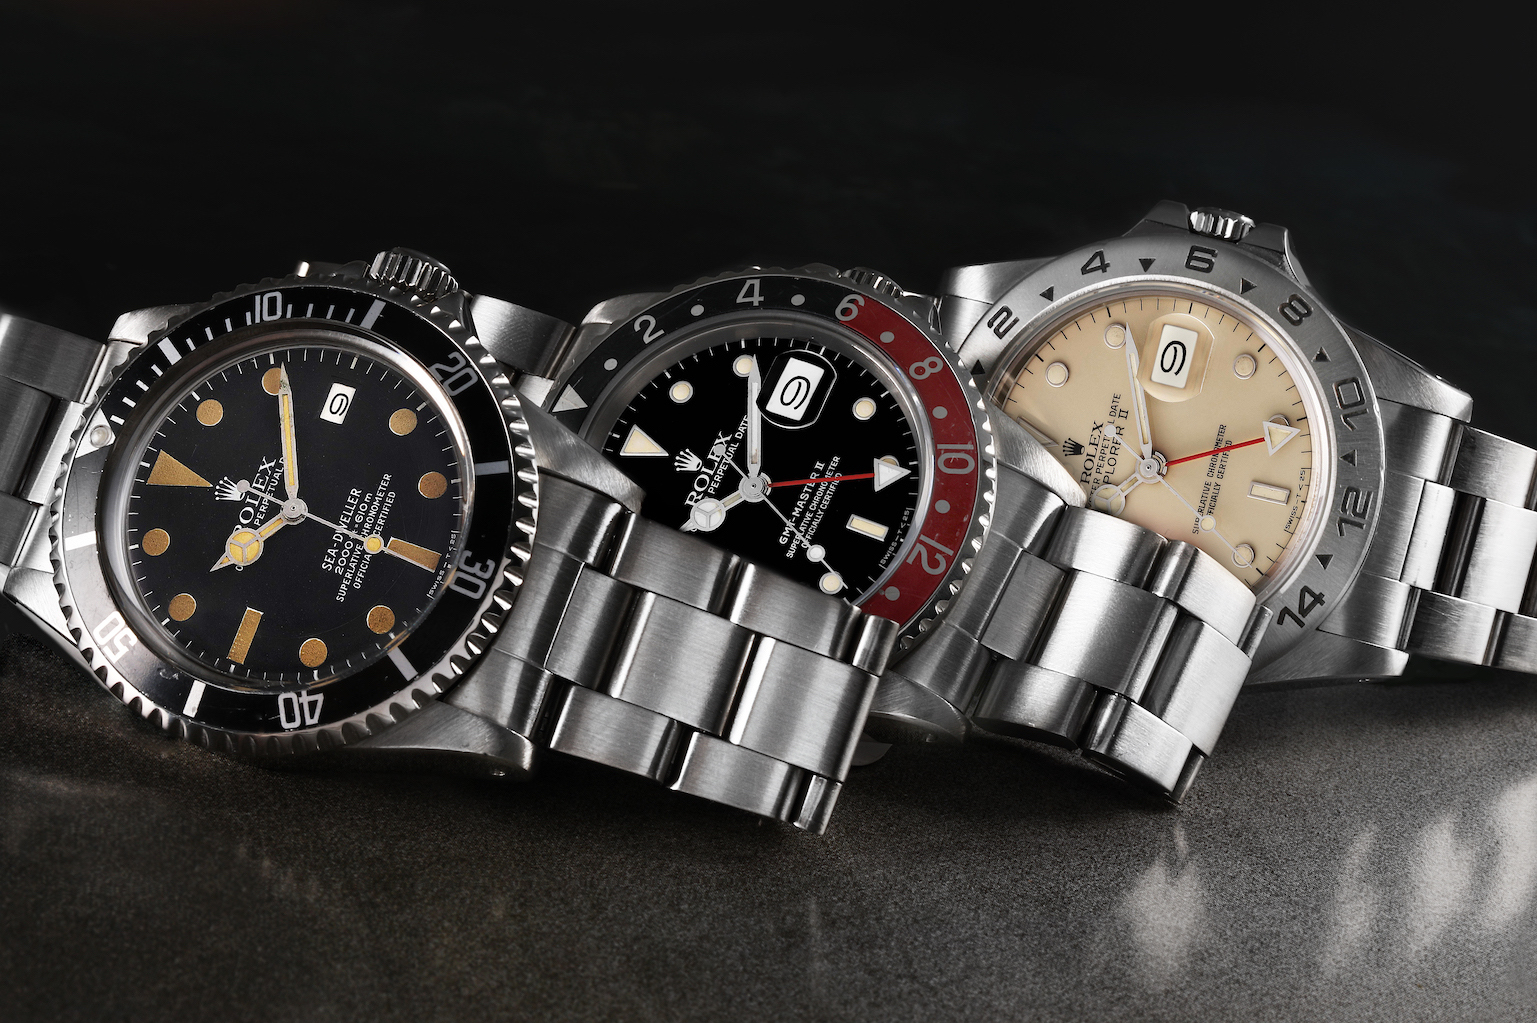 A Guide To Metals & Some Of Our Top Most Durable Watches | aBlogtoWatch